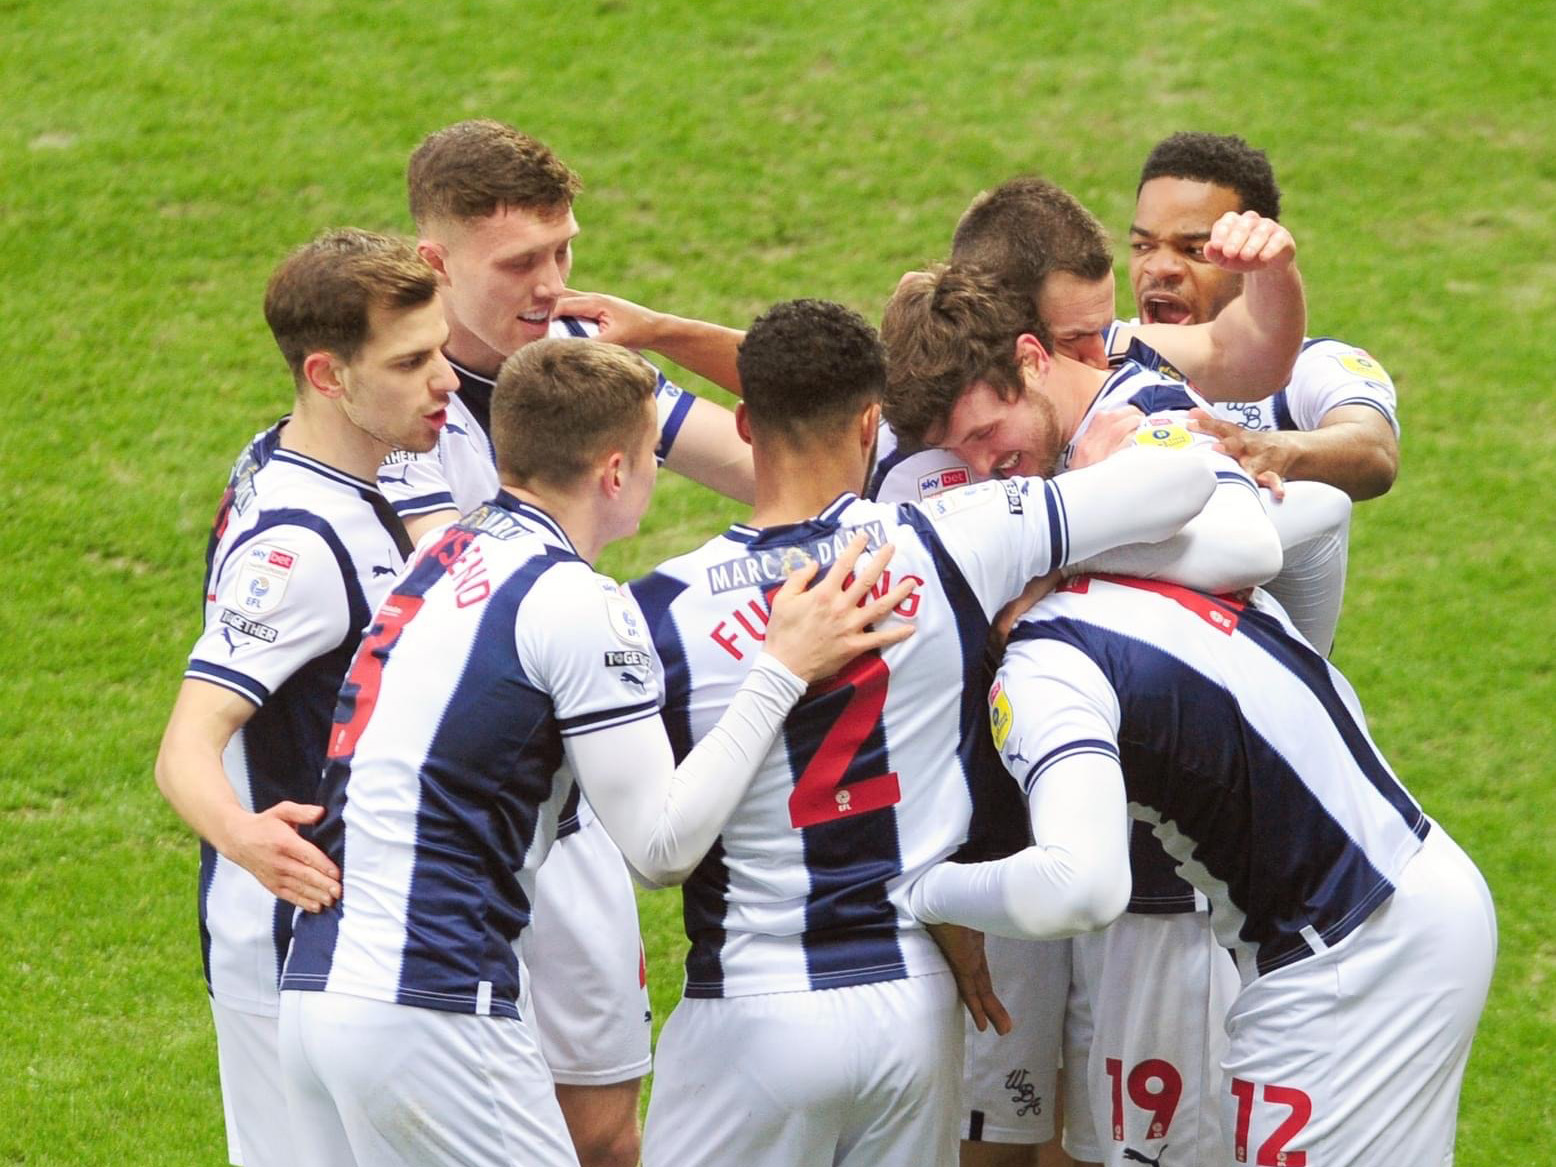 Albion players huddle together to celebrate scoring a goal